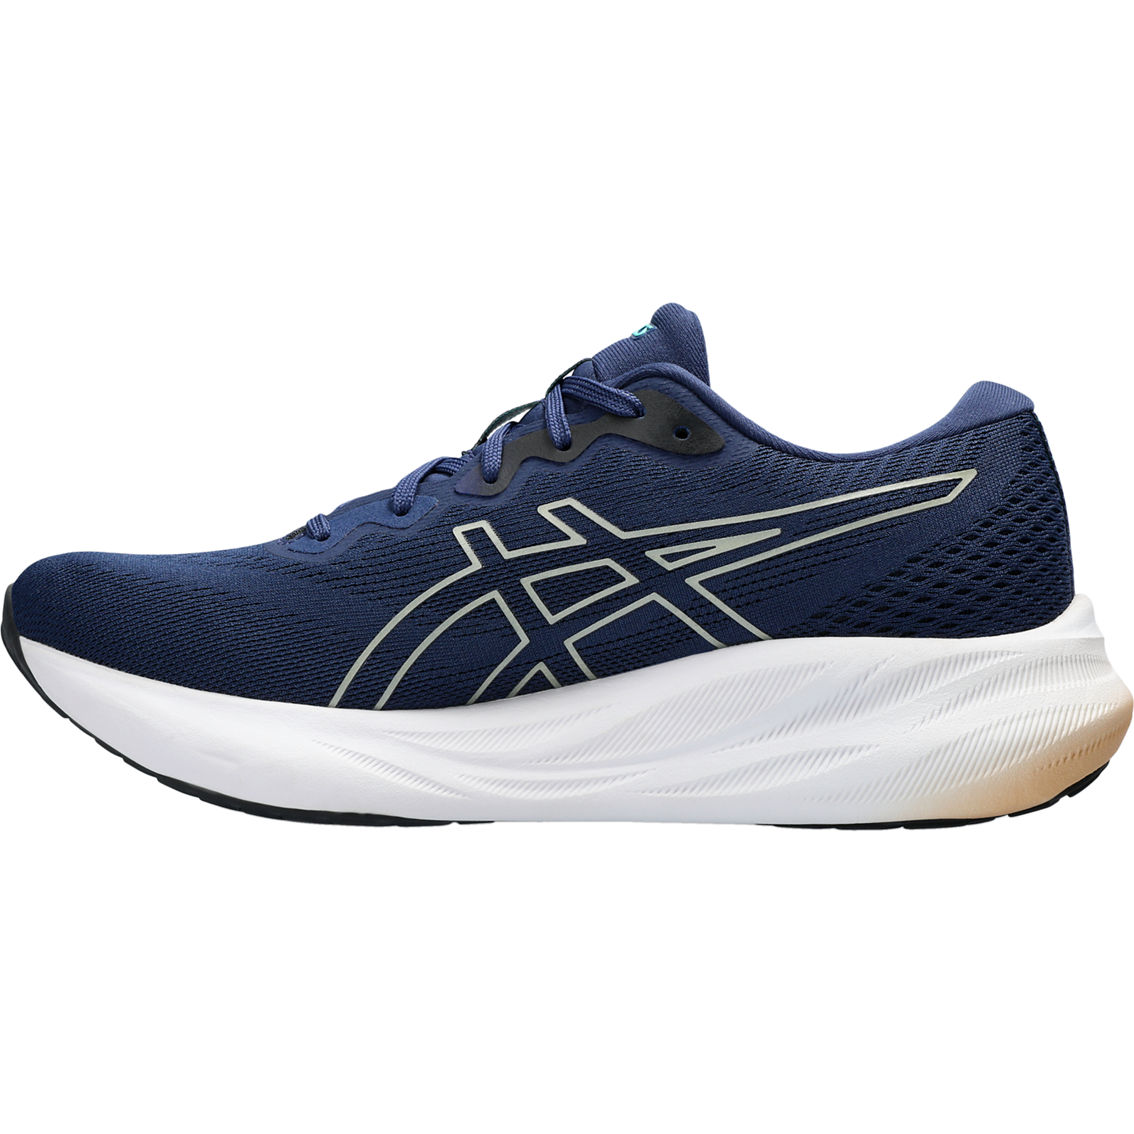 Asics Women's Gel-pulse 15 Running Shoes | Women's Athletic Shoes ...